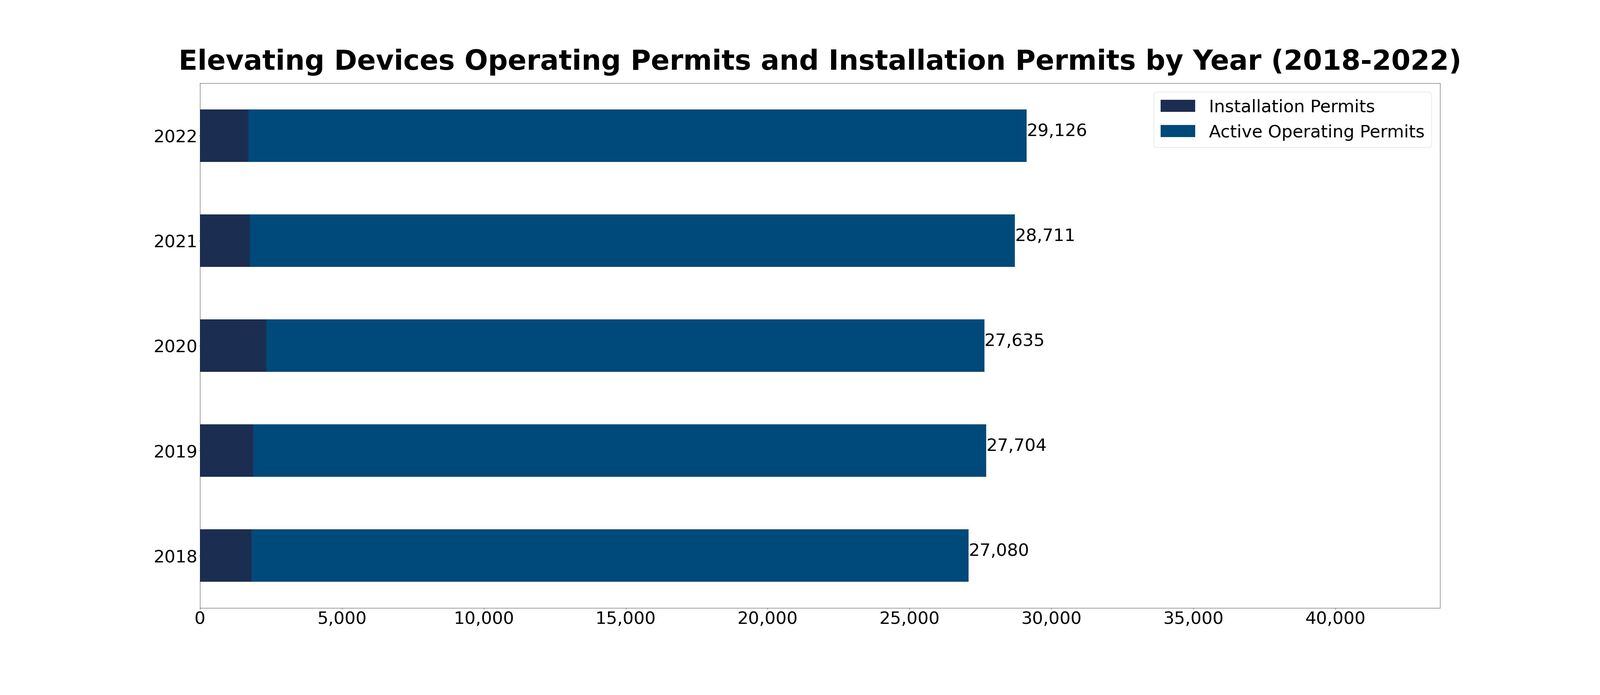 Elevating-Devices-Operating-Permits-Installation-Permits-2018-2022.jpg